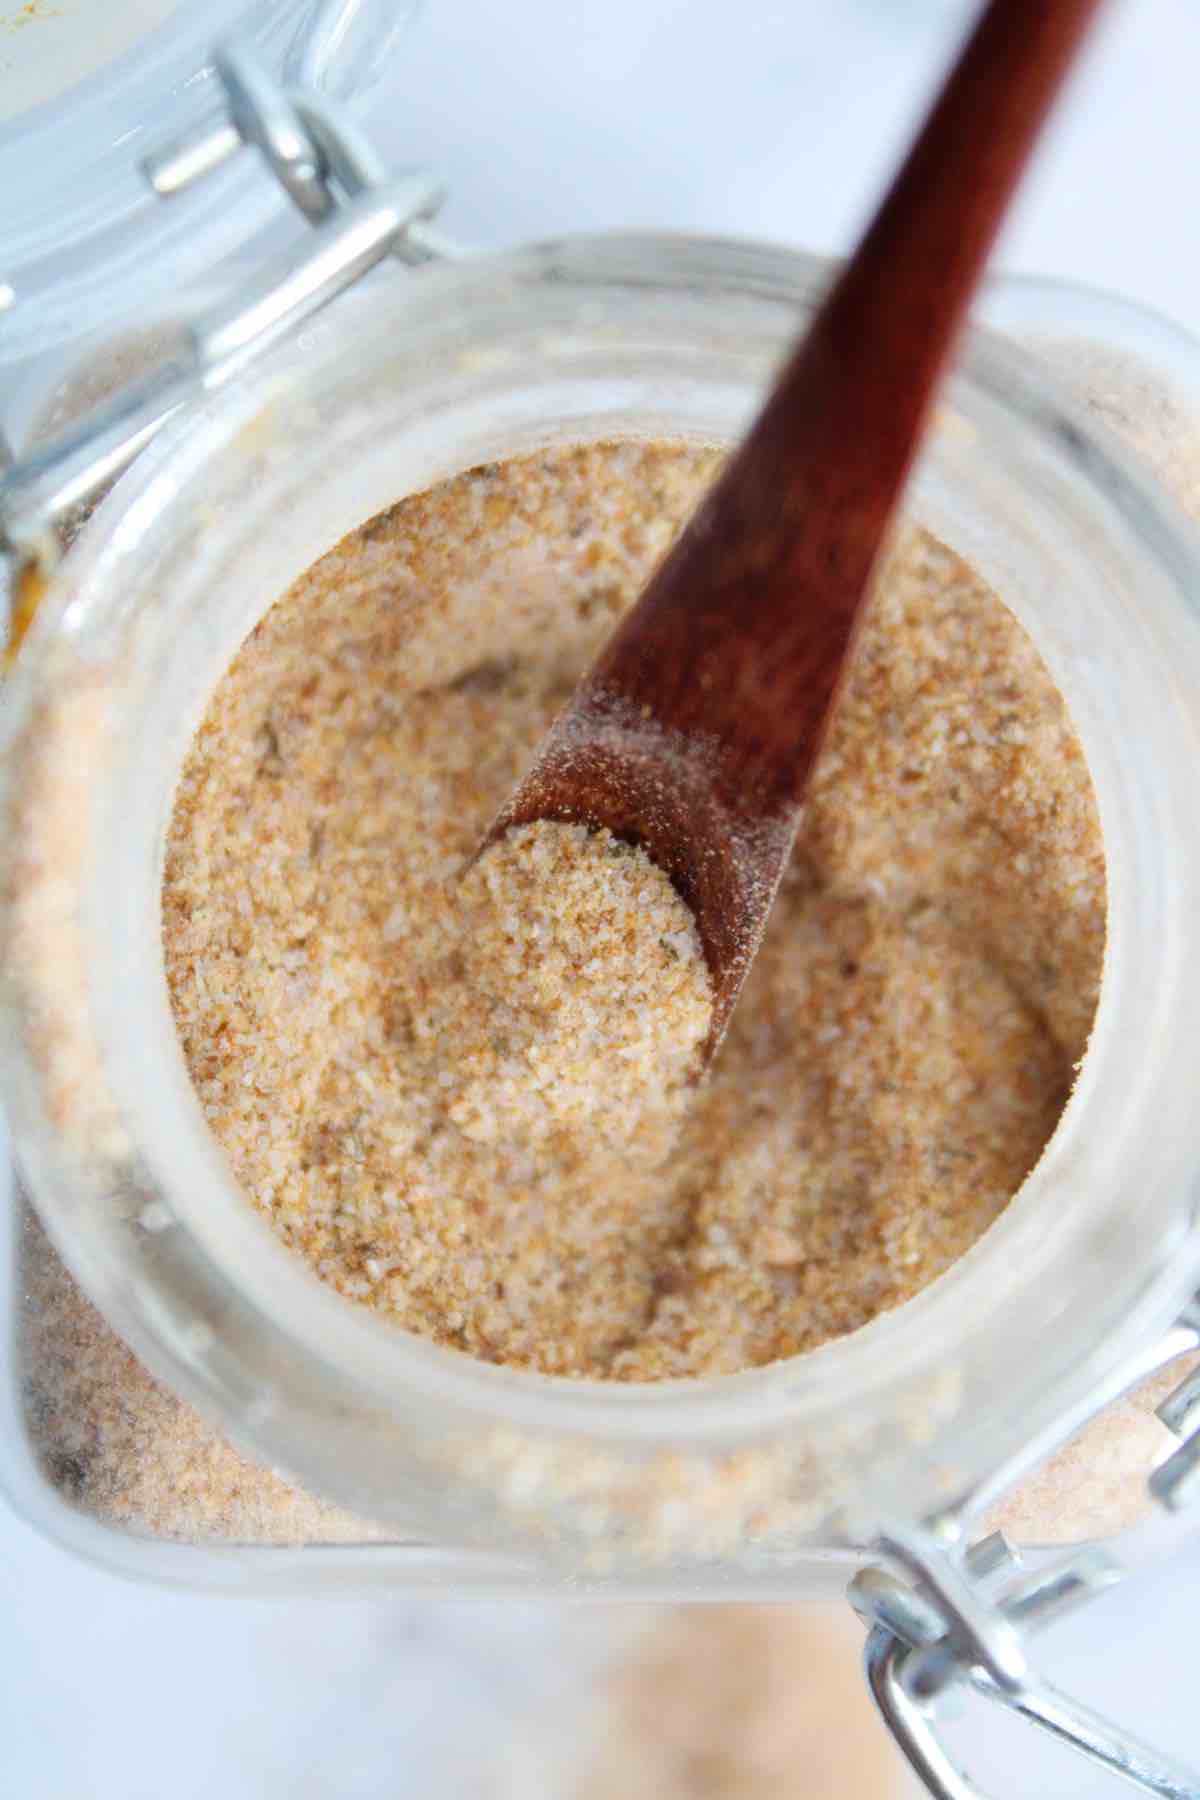 Homemade spicy adobo seasoning recipe is made in just 5 minutes.